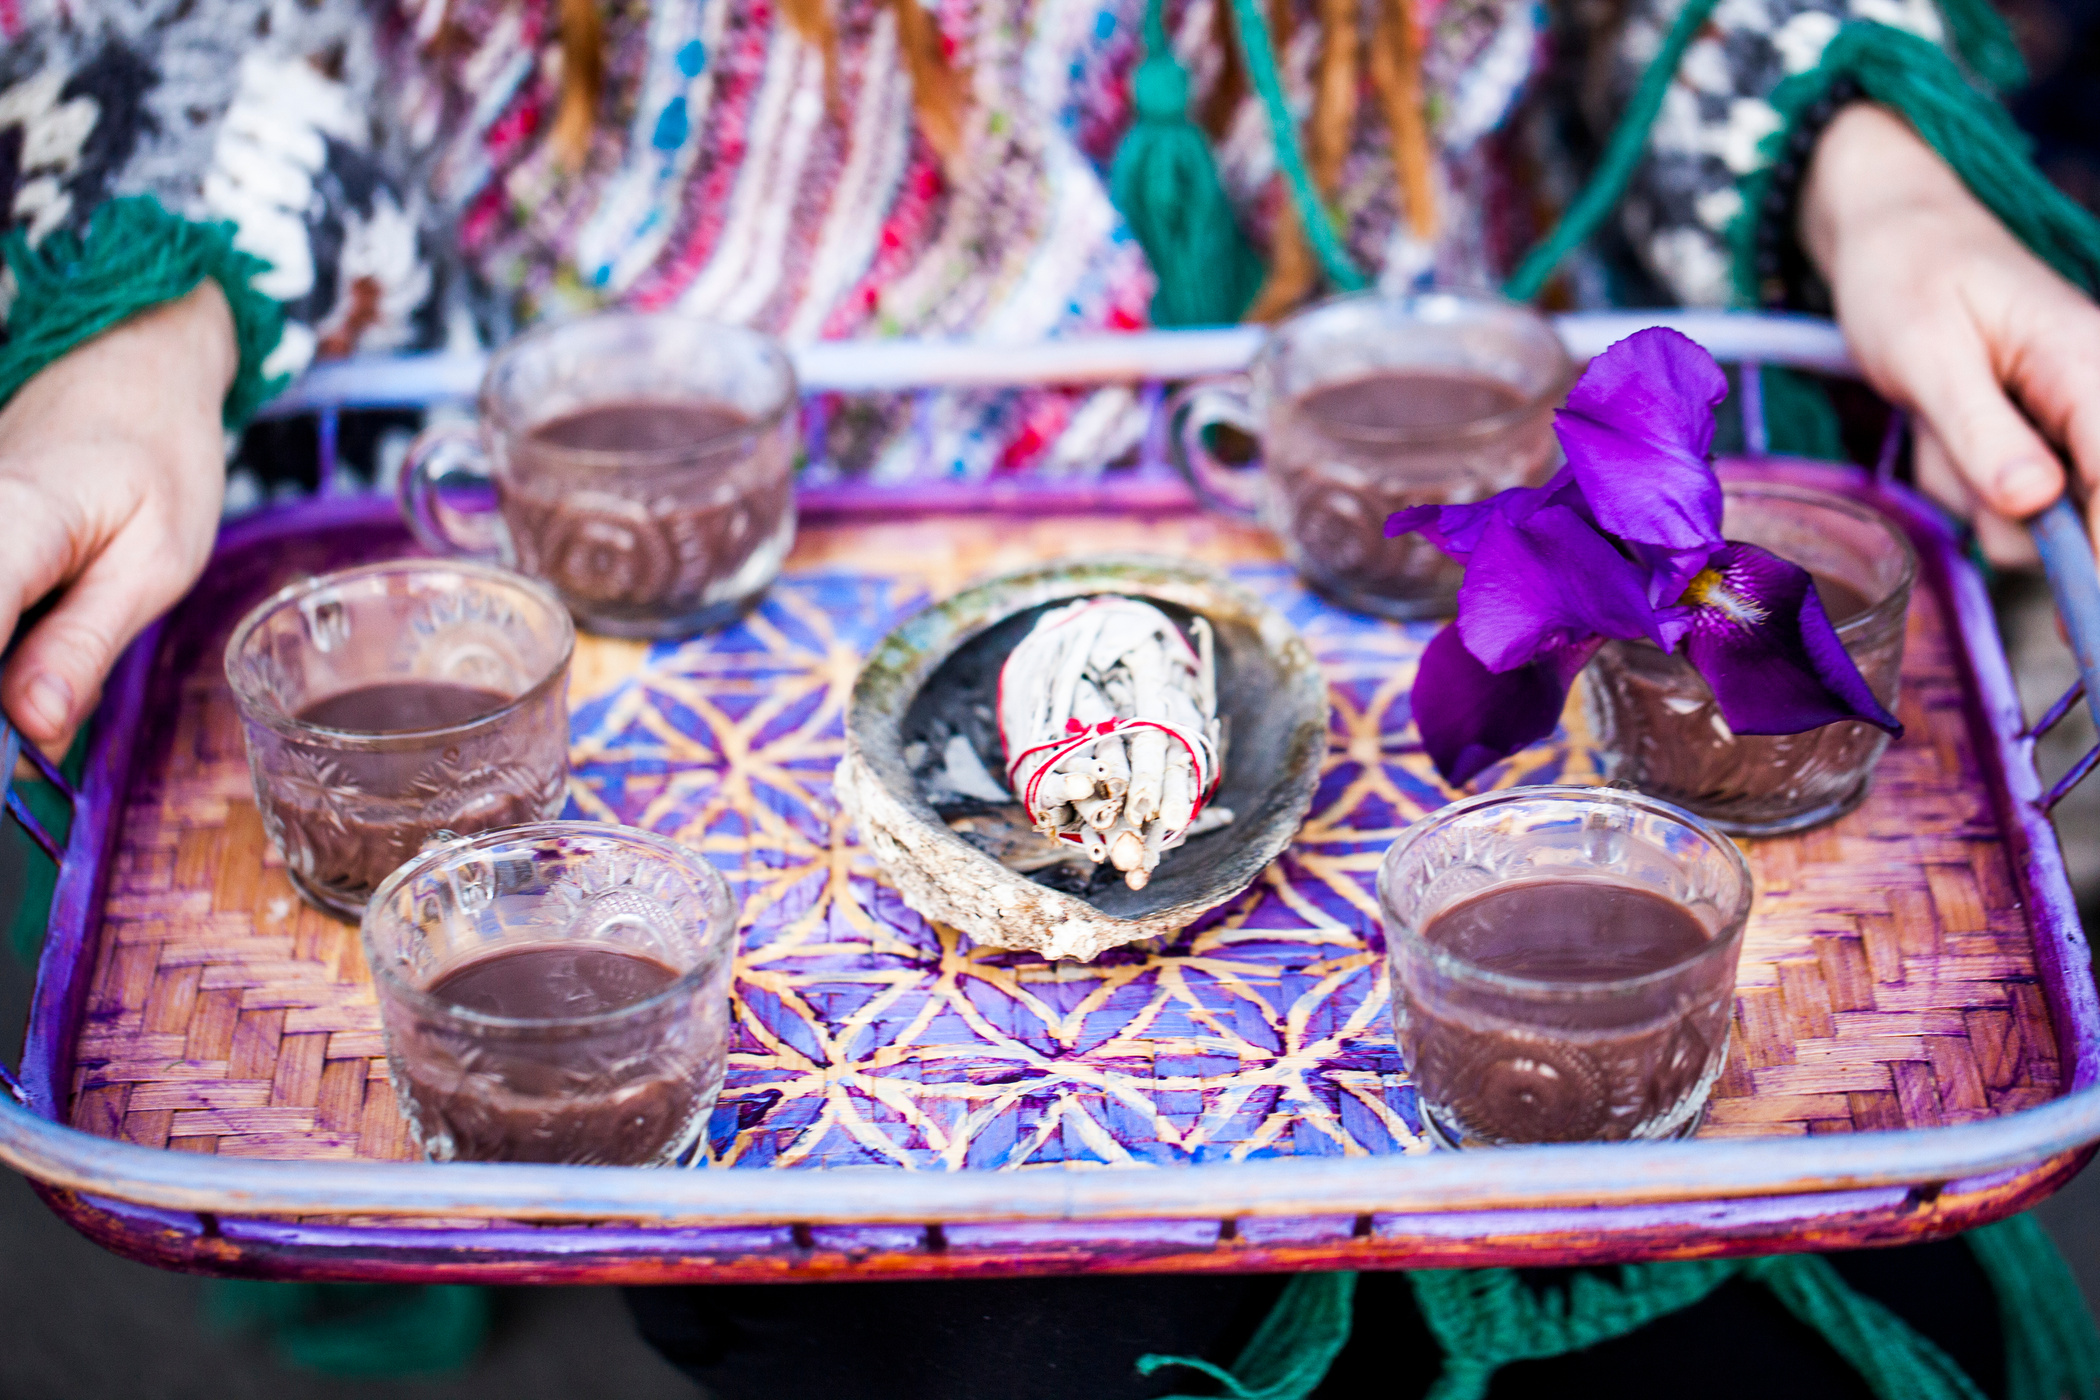 Ceremonial Cacao Drinks: Super Food Raw Chocoalte